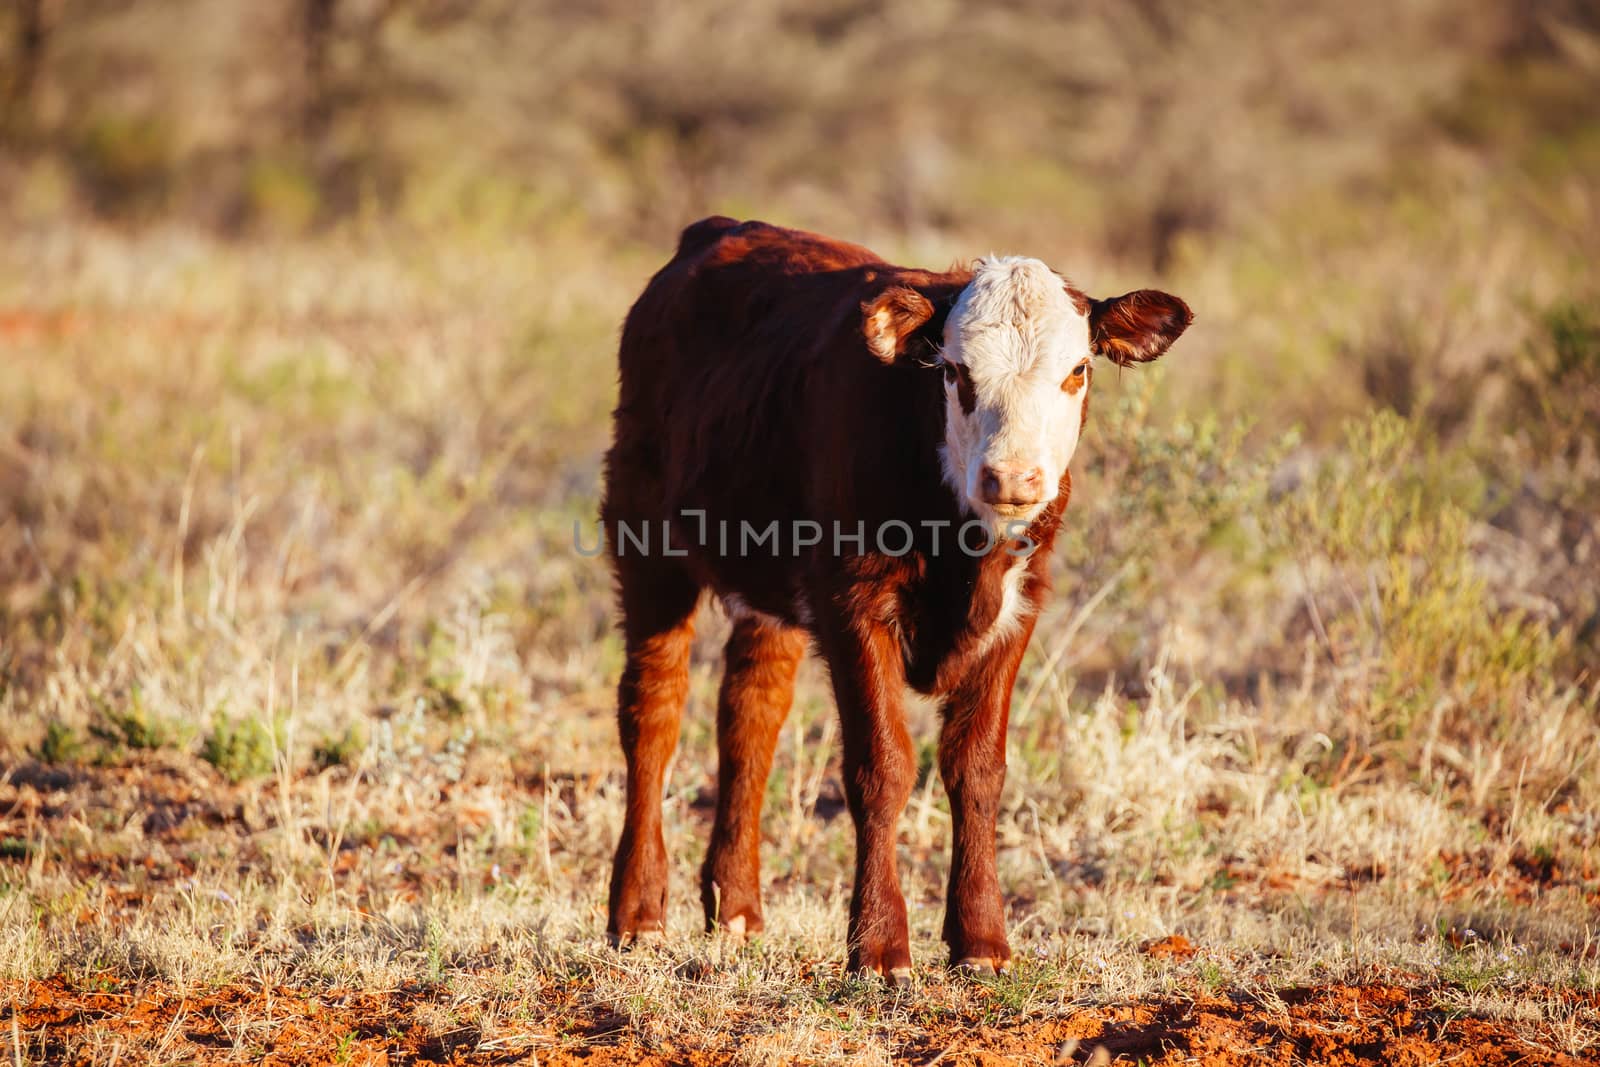 A cow grazes by the side of the Plenty Hwy near Mount Riddock cattle station in Northern Territory, Australia